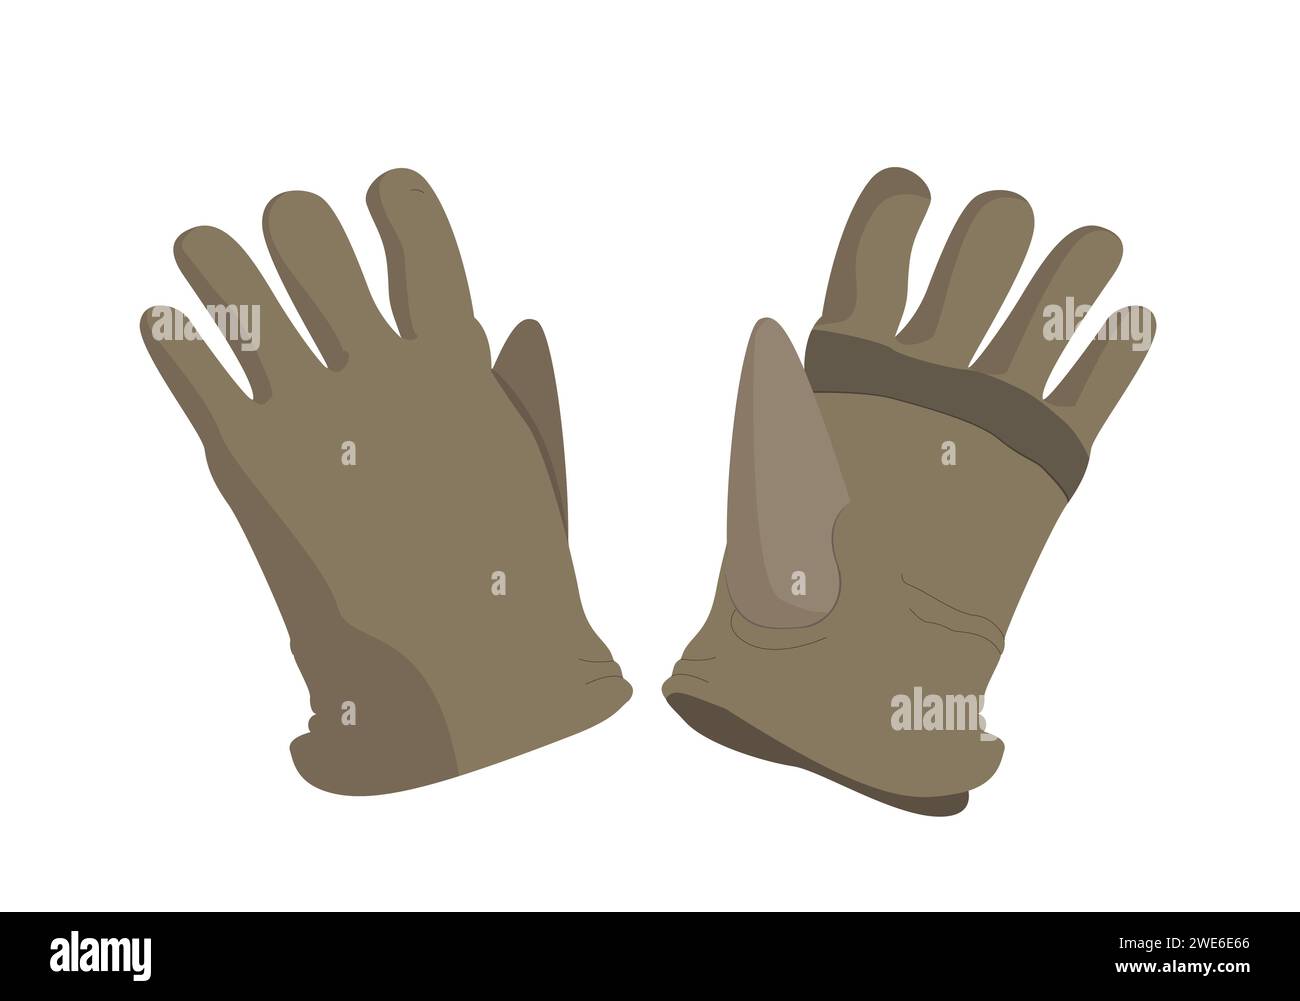 Pair of brown leather worker building glove for hand protection. Vector illustration Stock Vector